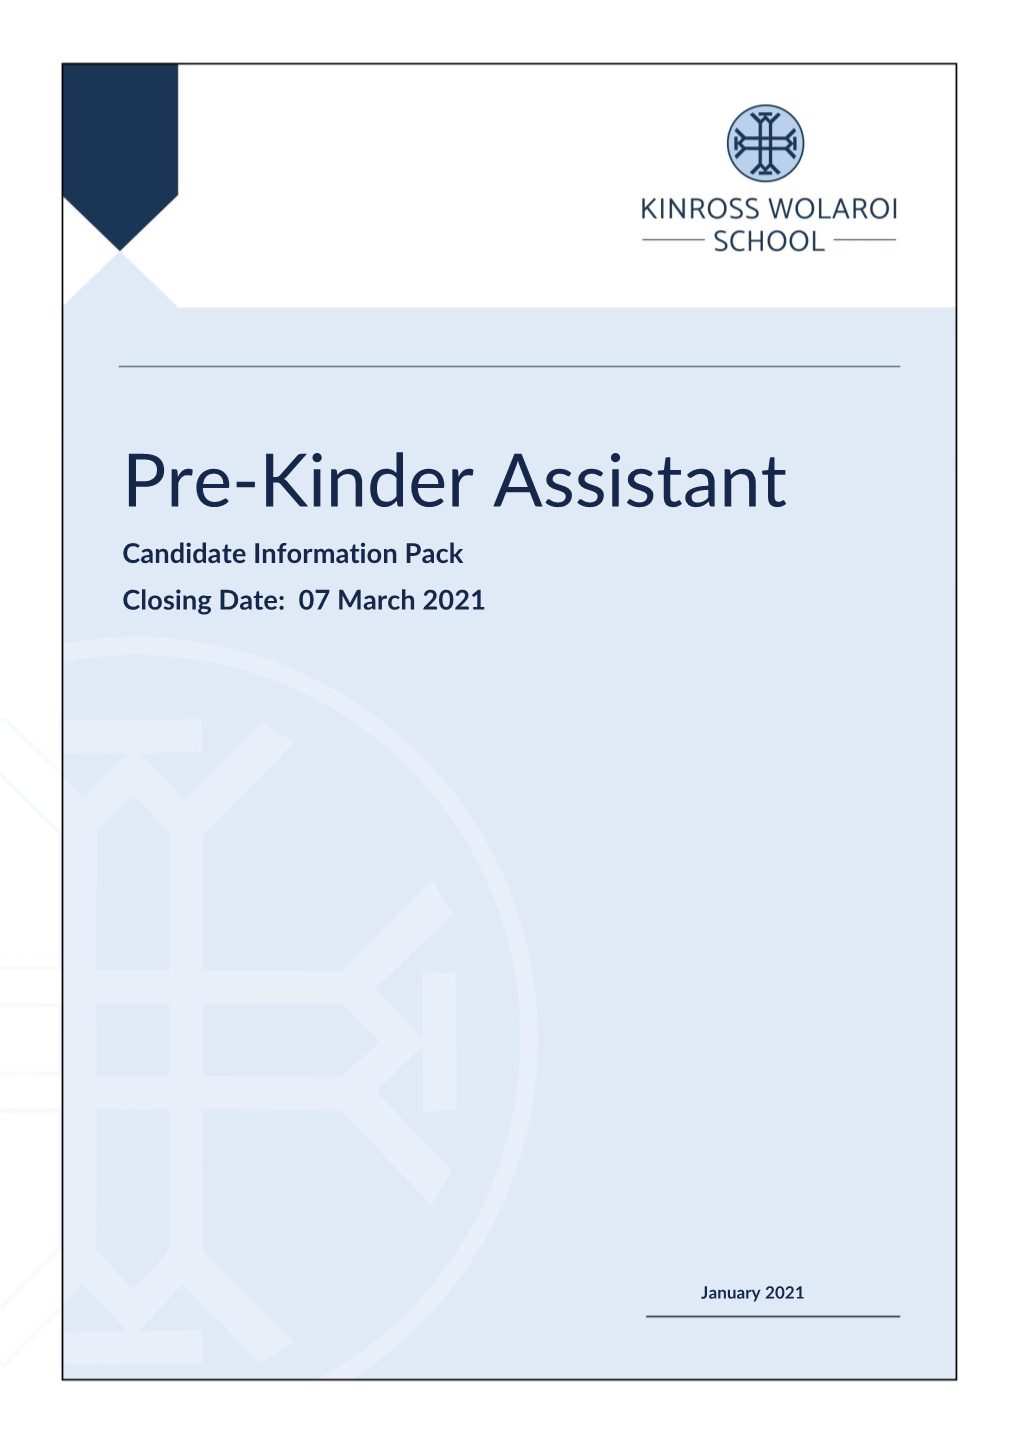 Pre-Kinder Assistant Candidate Information Pack Closing Date: 07 March 2021